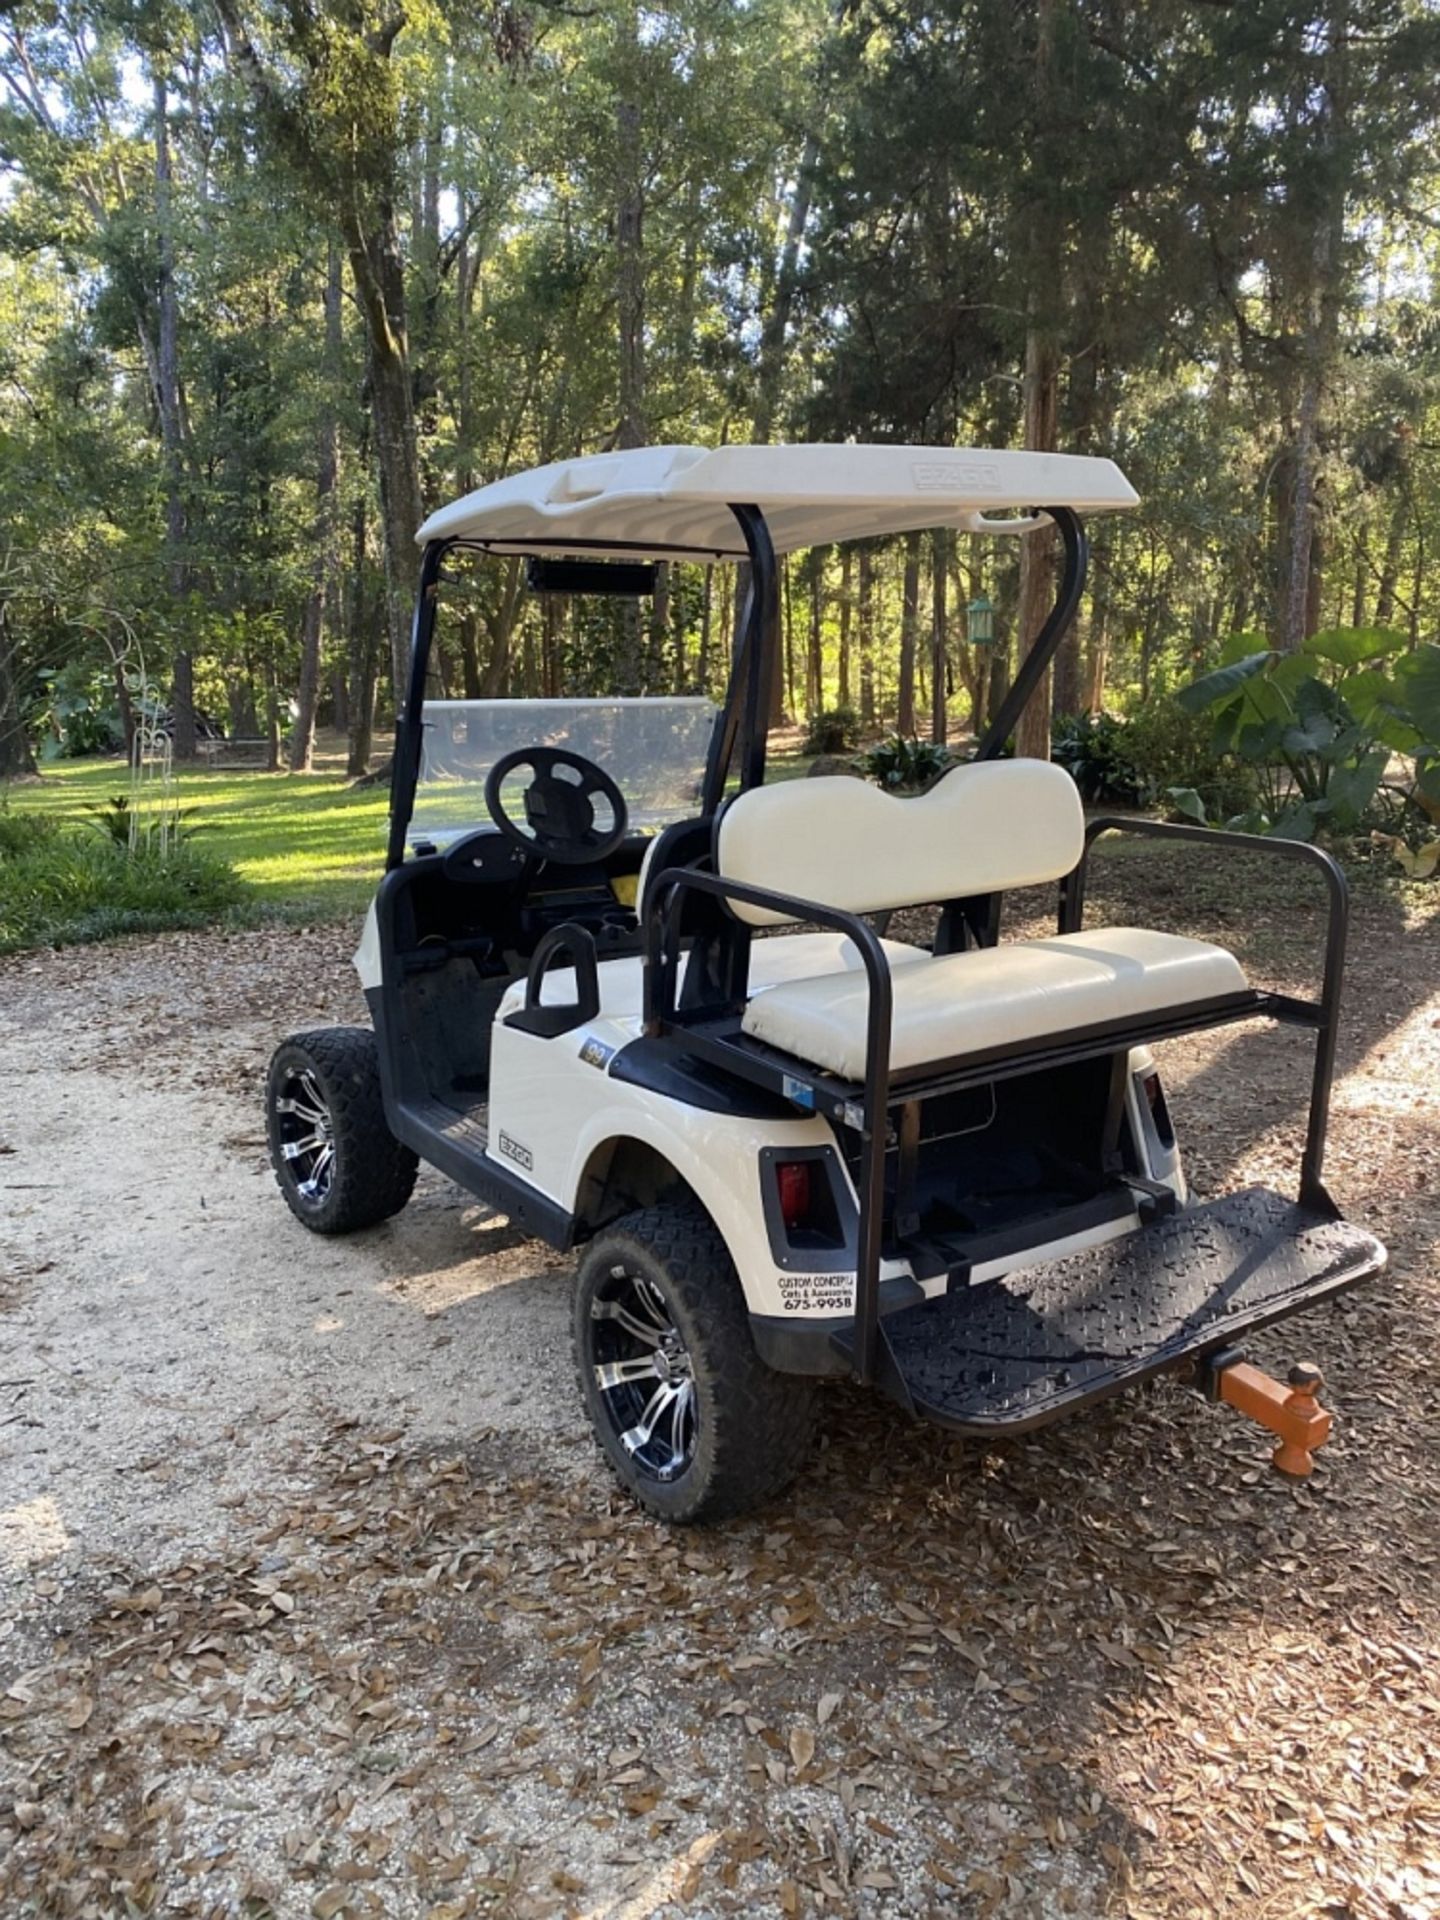 2010 EZGO RXV GOLF CART 4-SEATER, ELECTRIC - Image 2 of 6